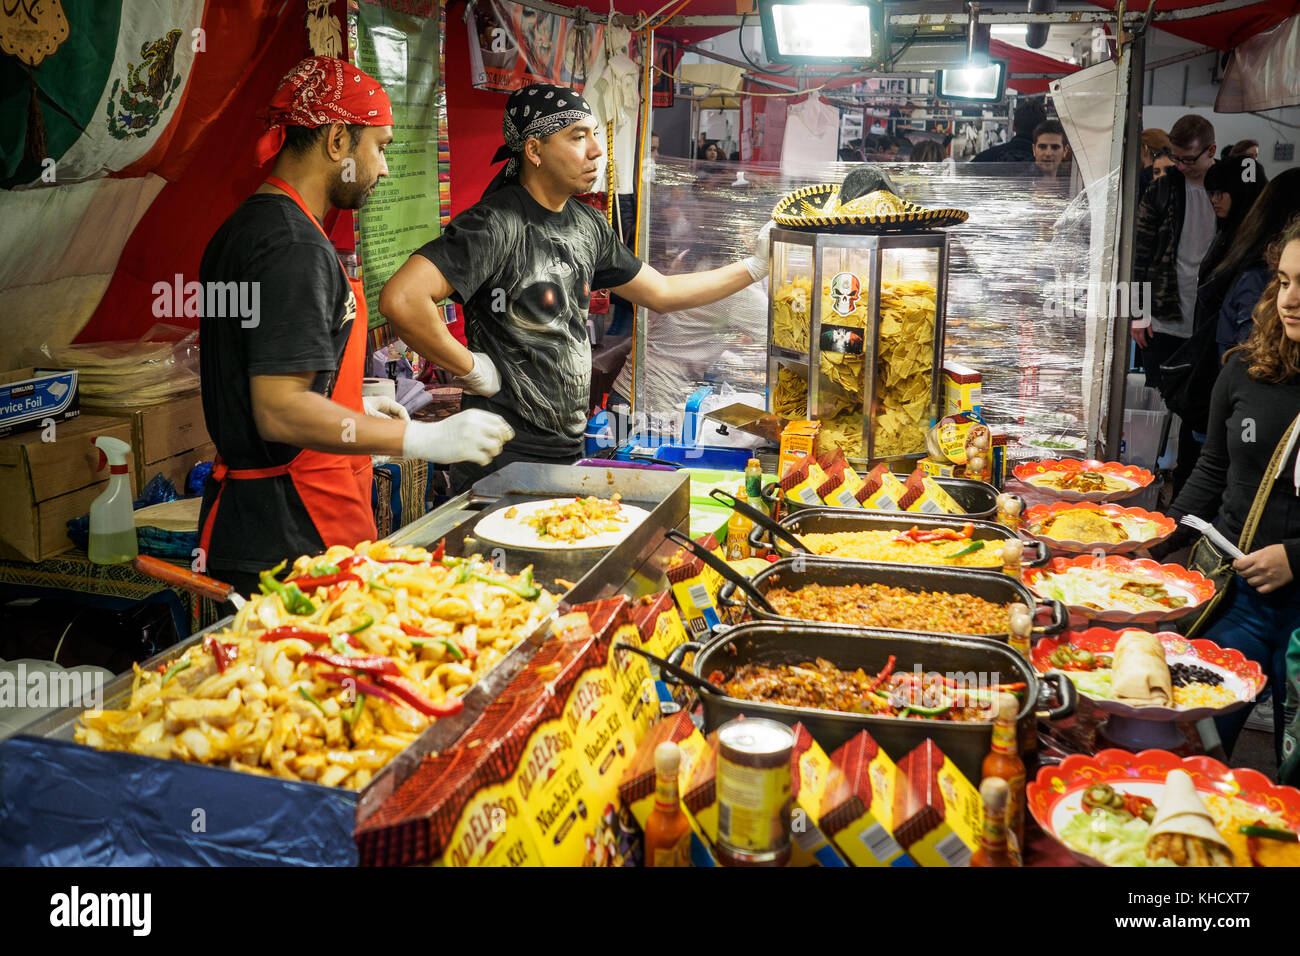 Mexican street food stall in Brick Lane Market. London 2017. Landscape format. Stock Photo